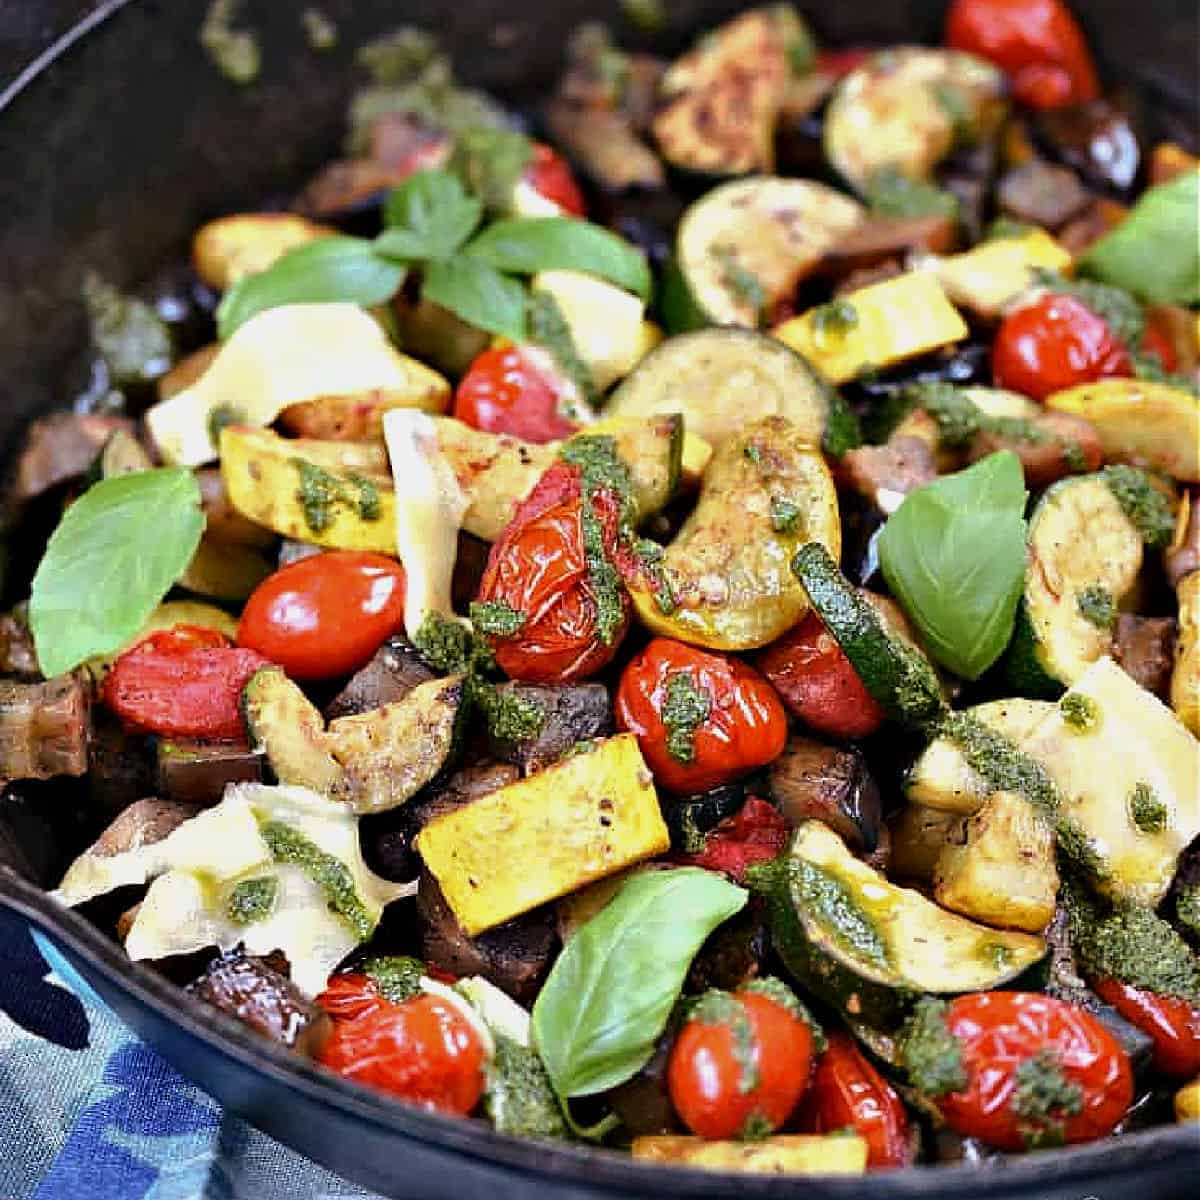 Chopped zucchini, squash, eggplant, and cherry tomatoes charred on the grill in a cast iron skillet.